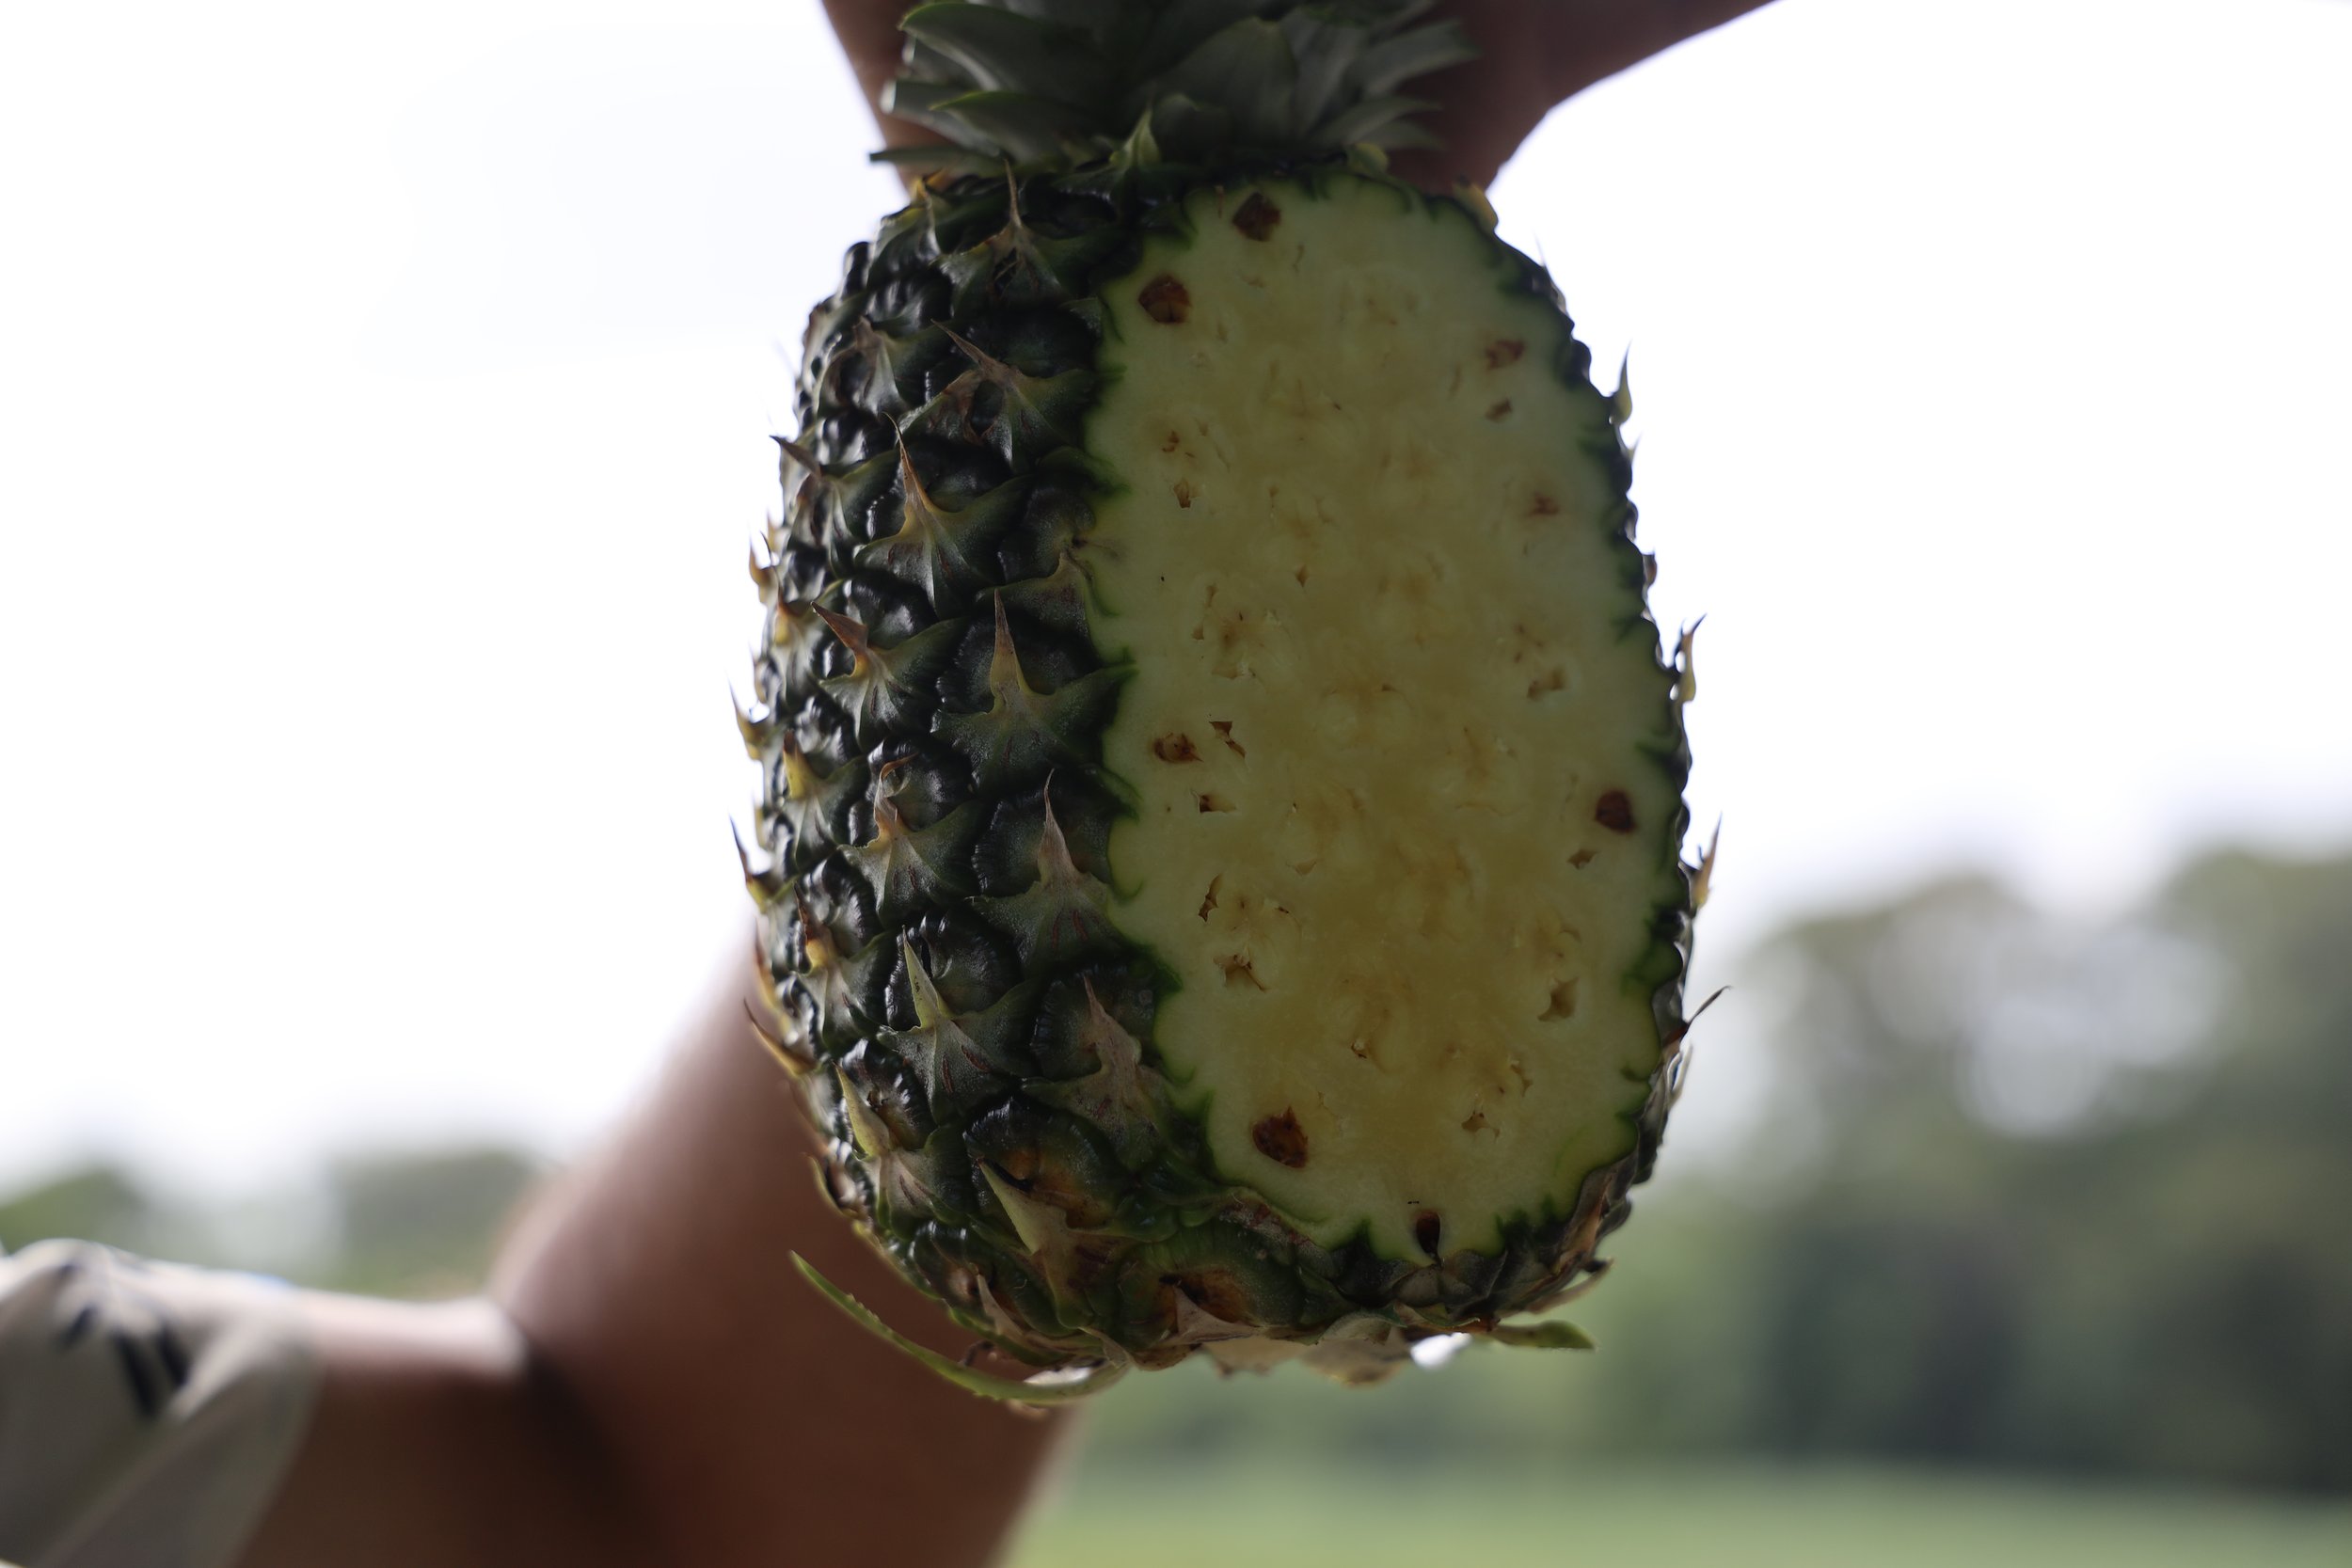  Contrary to popular belief, the green pineapples are ready for consumption. You can see the interior is ripe, and the juice is already leaking at the bottom.&nbsp; Pineapples, if stored in 45 degree temps, can last for about 40 days from the time th